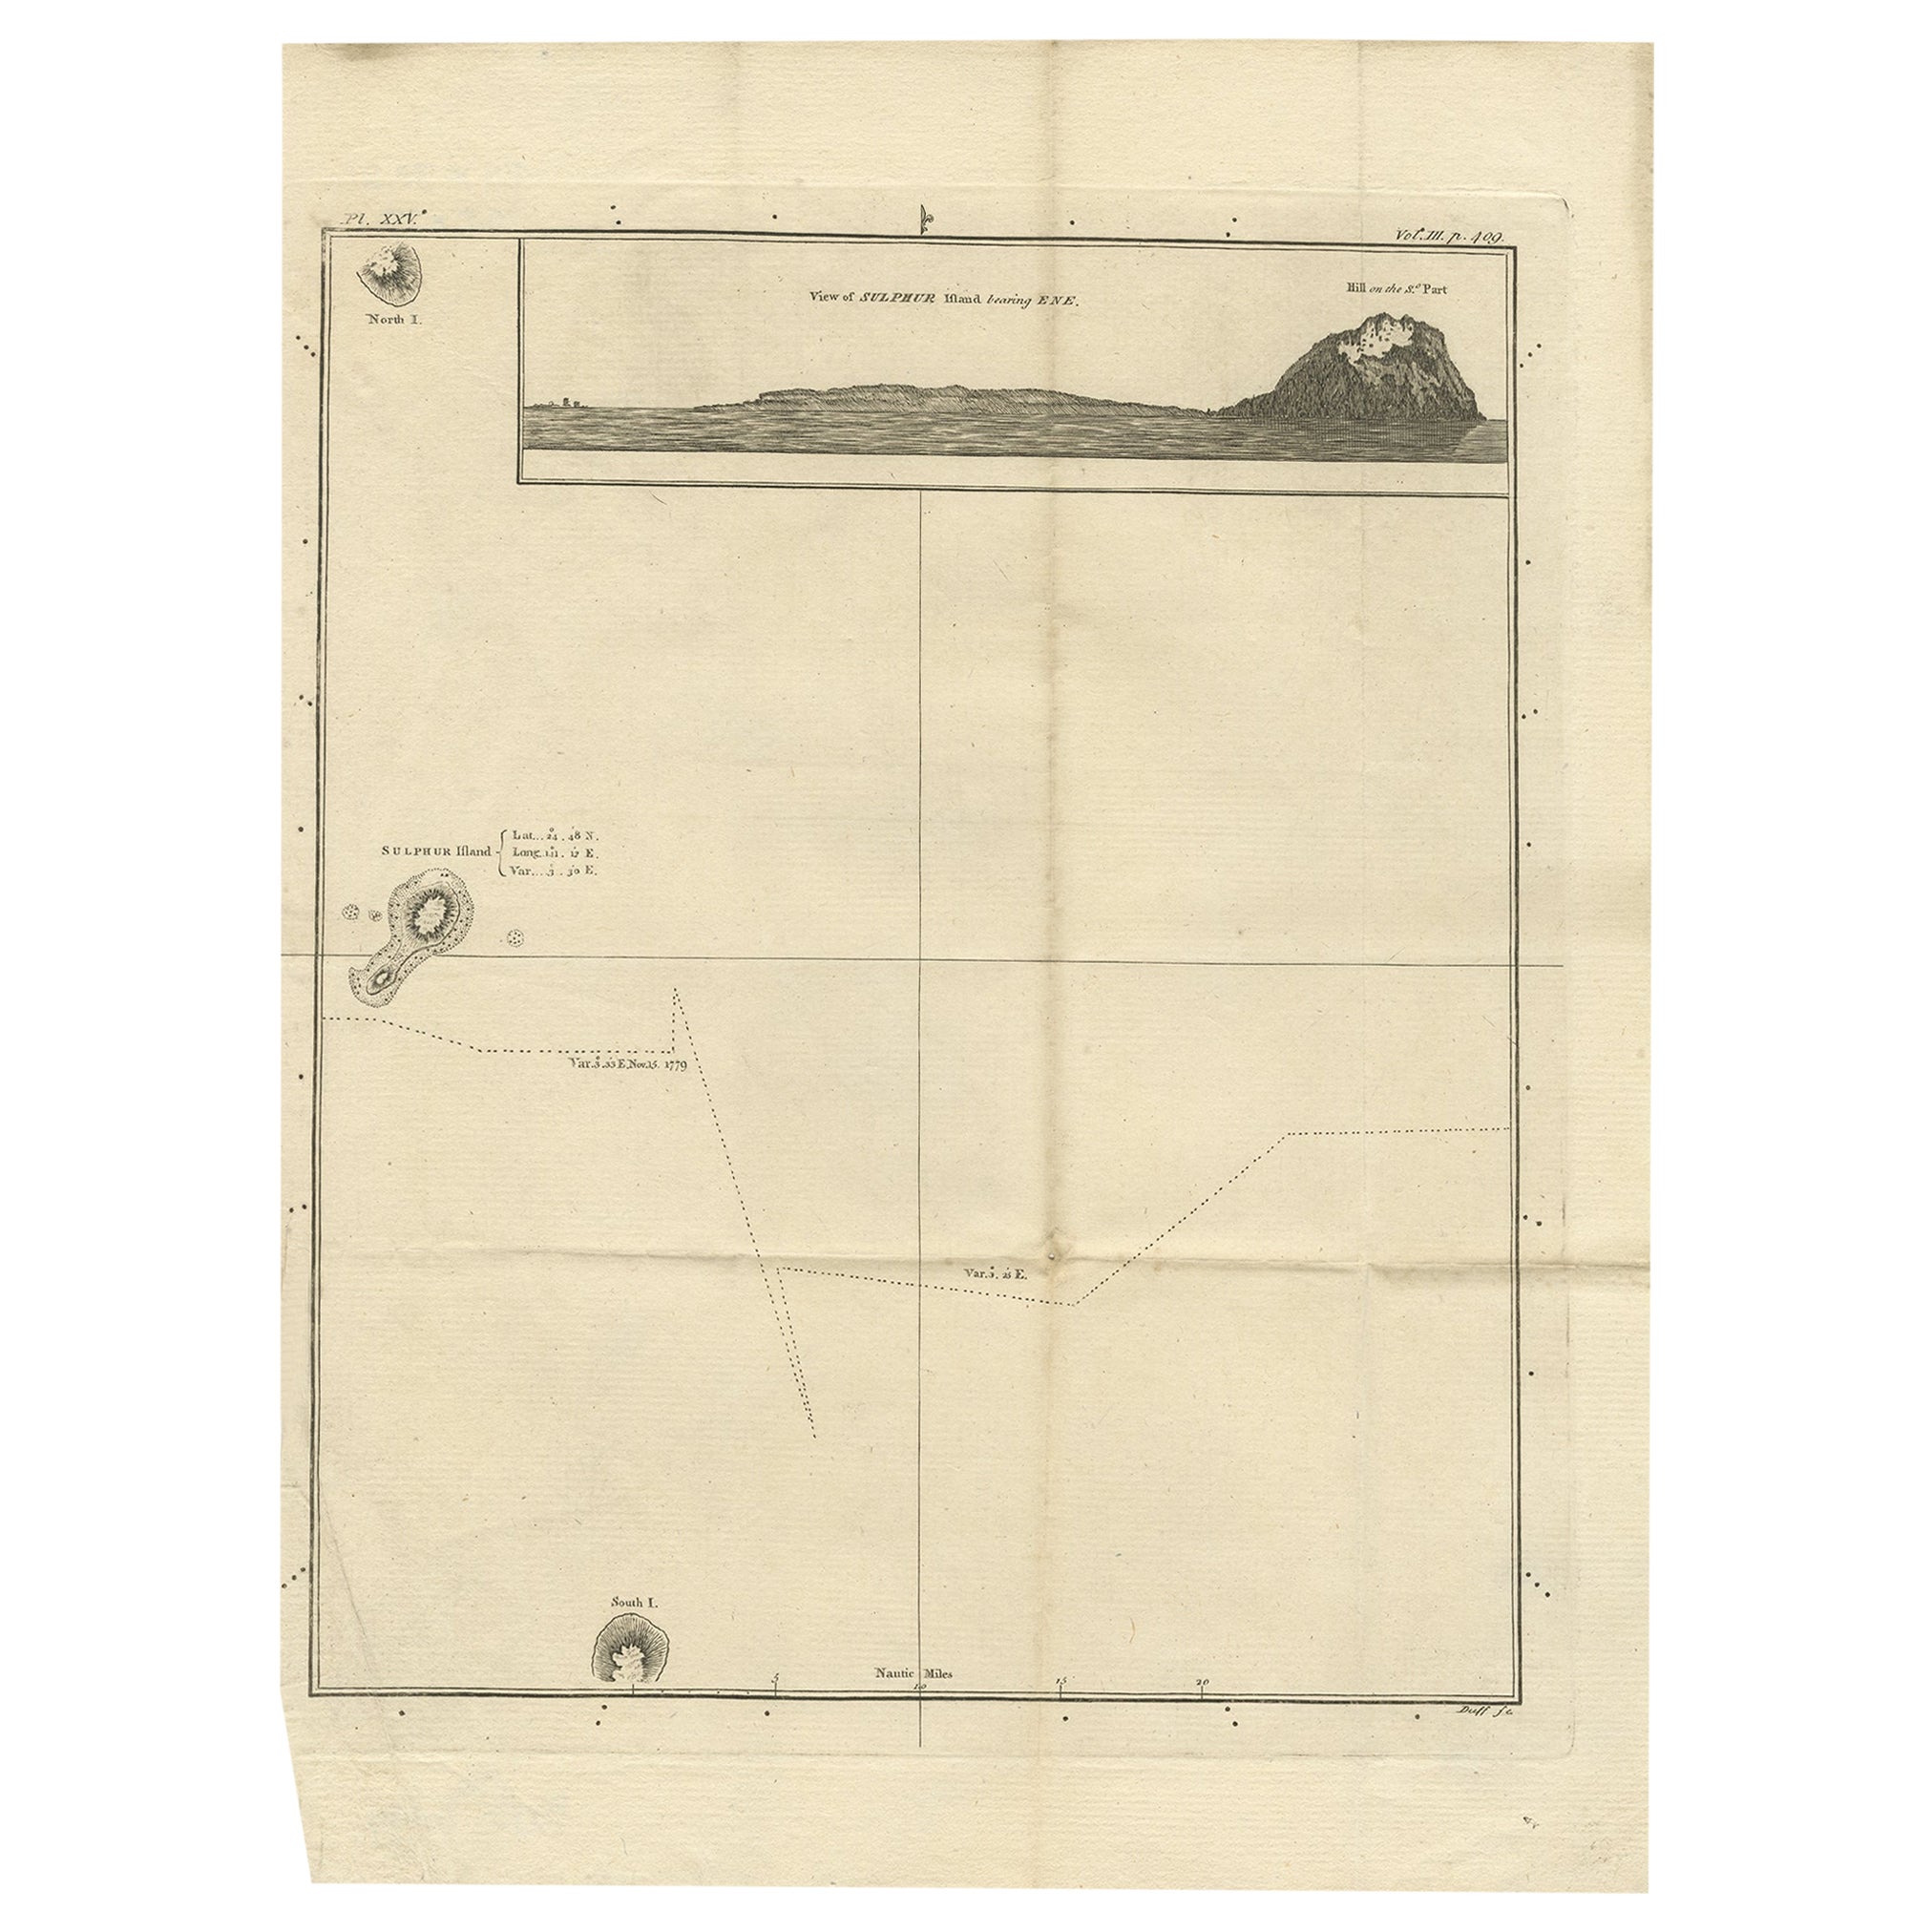 Antique Map of Suffren Island by Cook, c.1781